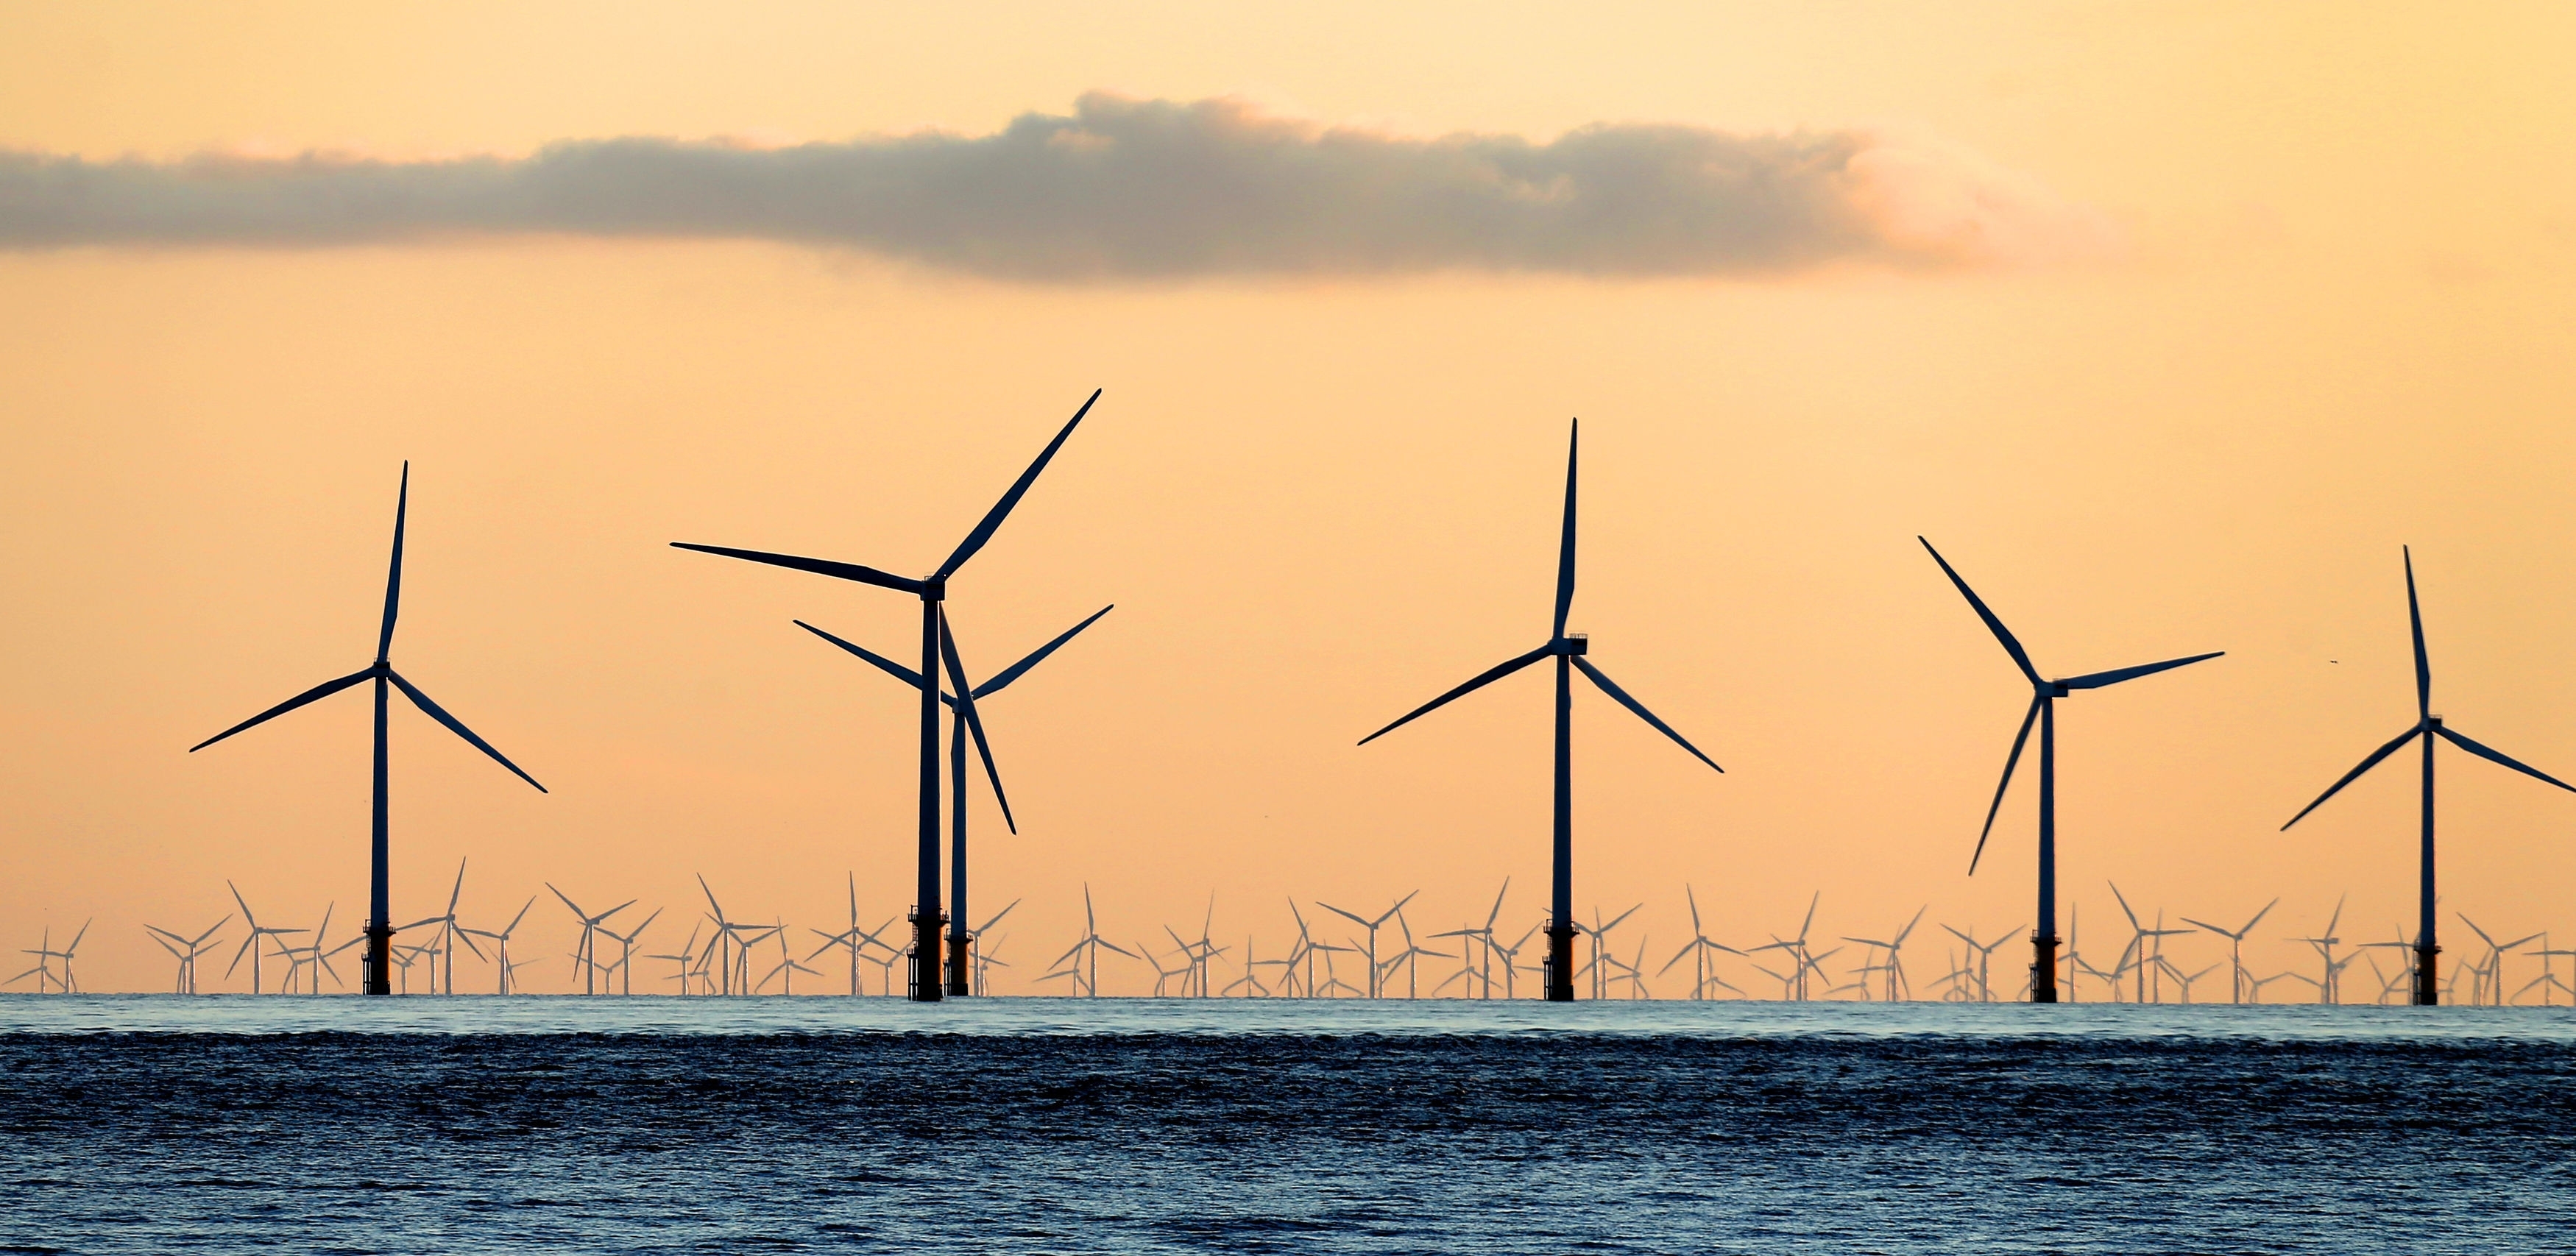 The North Sea has been described as pivotal to Europe's renewable future.